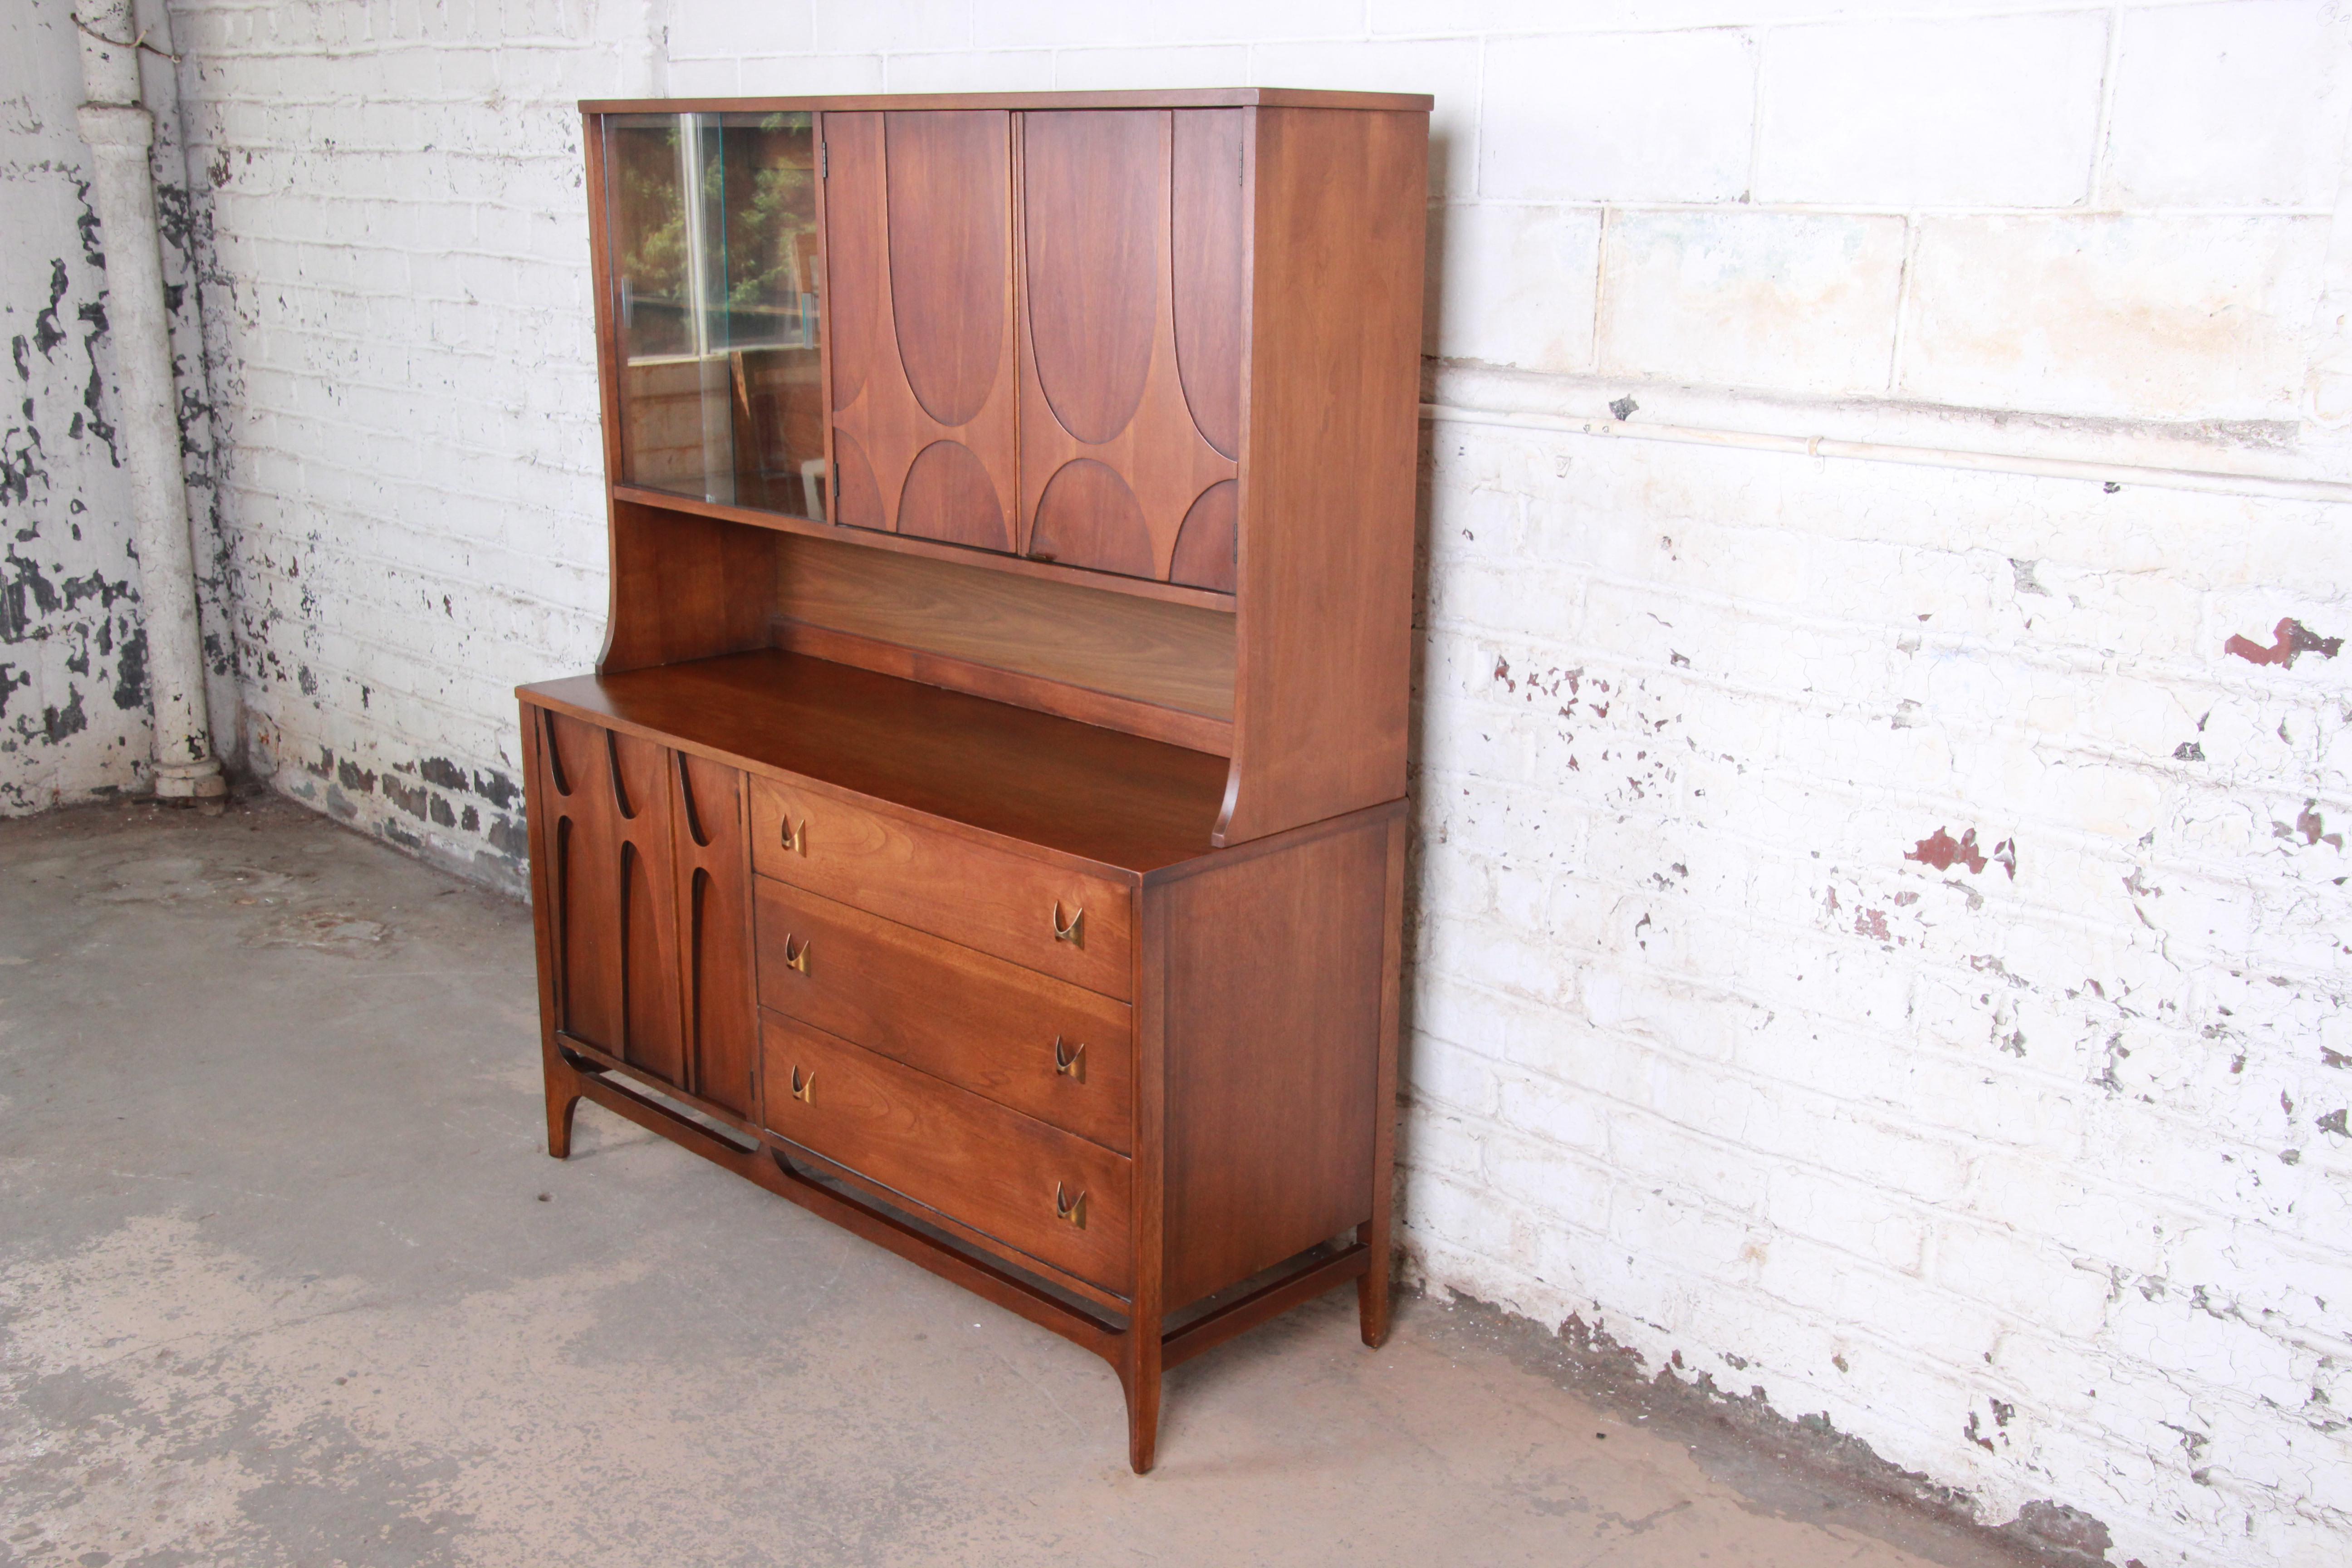 An exceptional Broyhill Brasilia mid-century modern sculpted walnut sideboard with hutch. The sideboard features gorgeous walnut wood grain, with sculpted arches and original brass pulls. It offers ample room for storage with three deep dovetailed